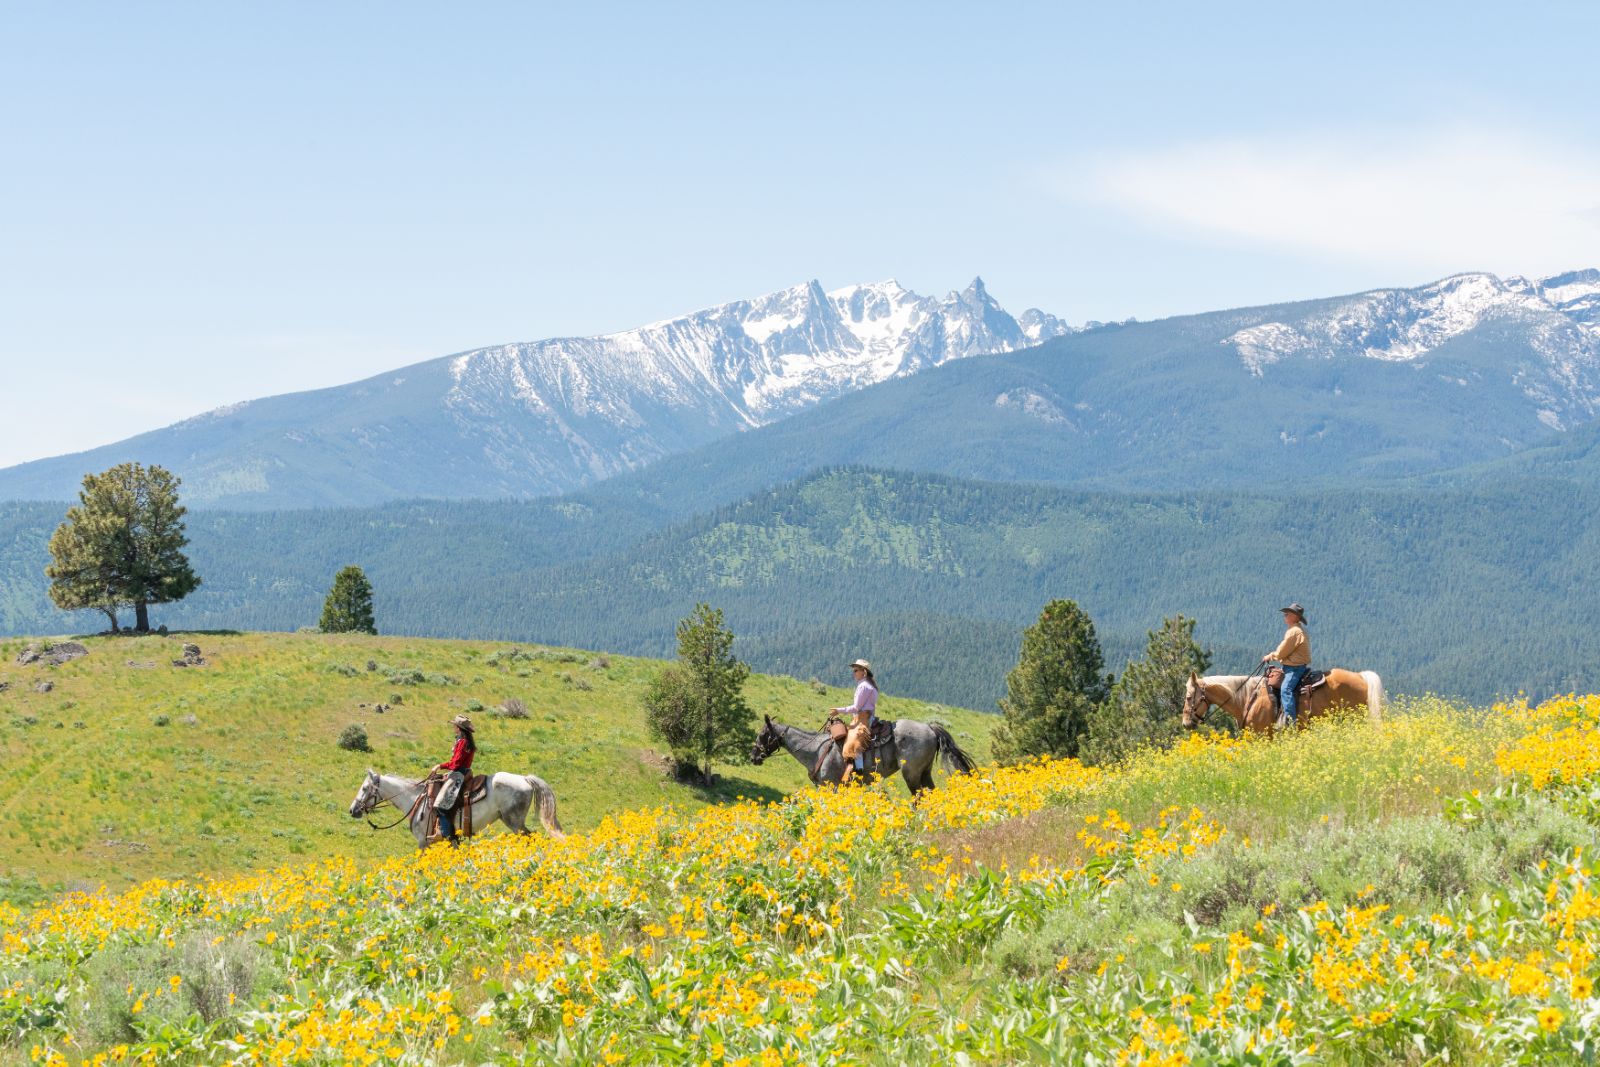 Riding on the grounds of Triple Creek Ranch in Montana, USA